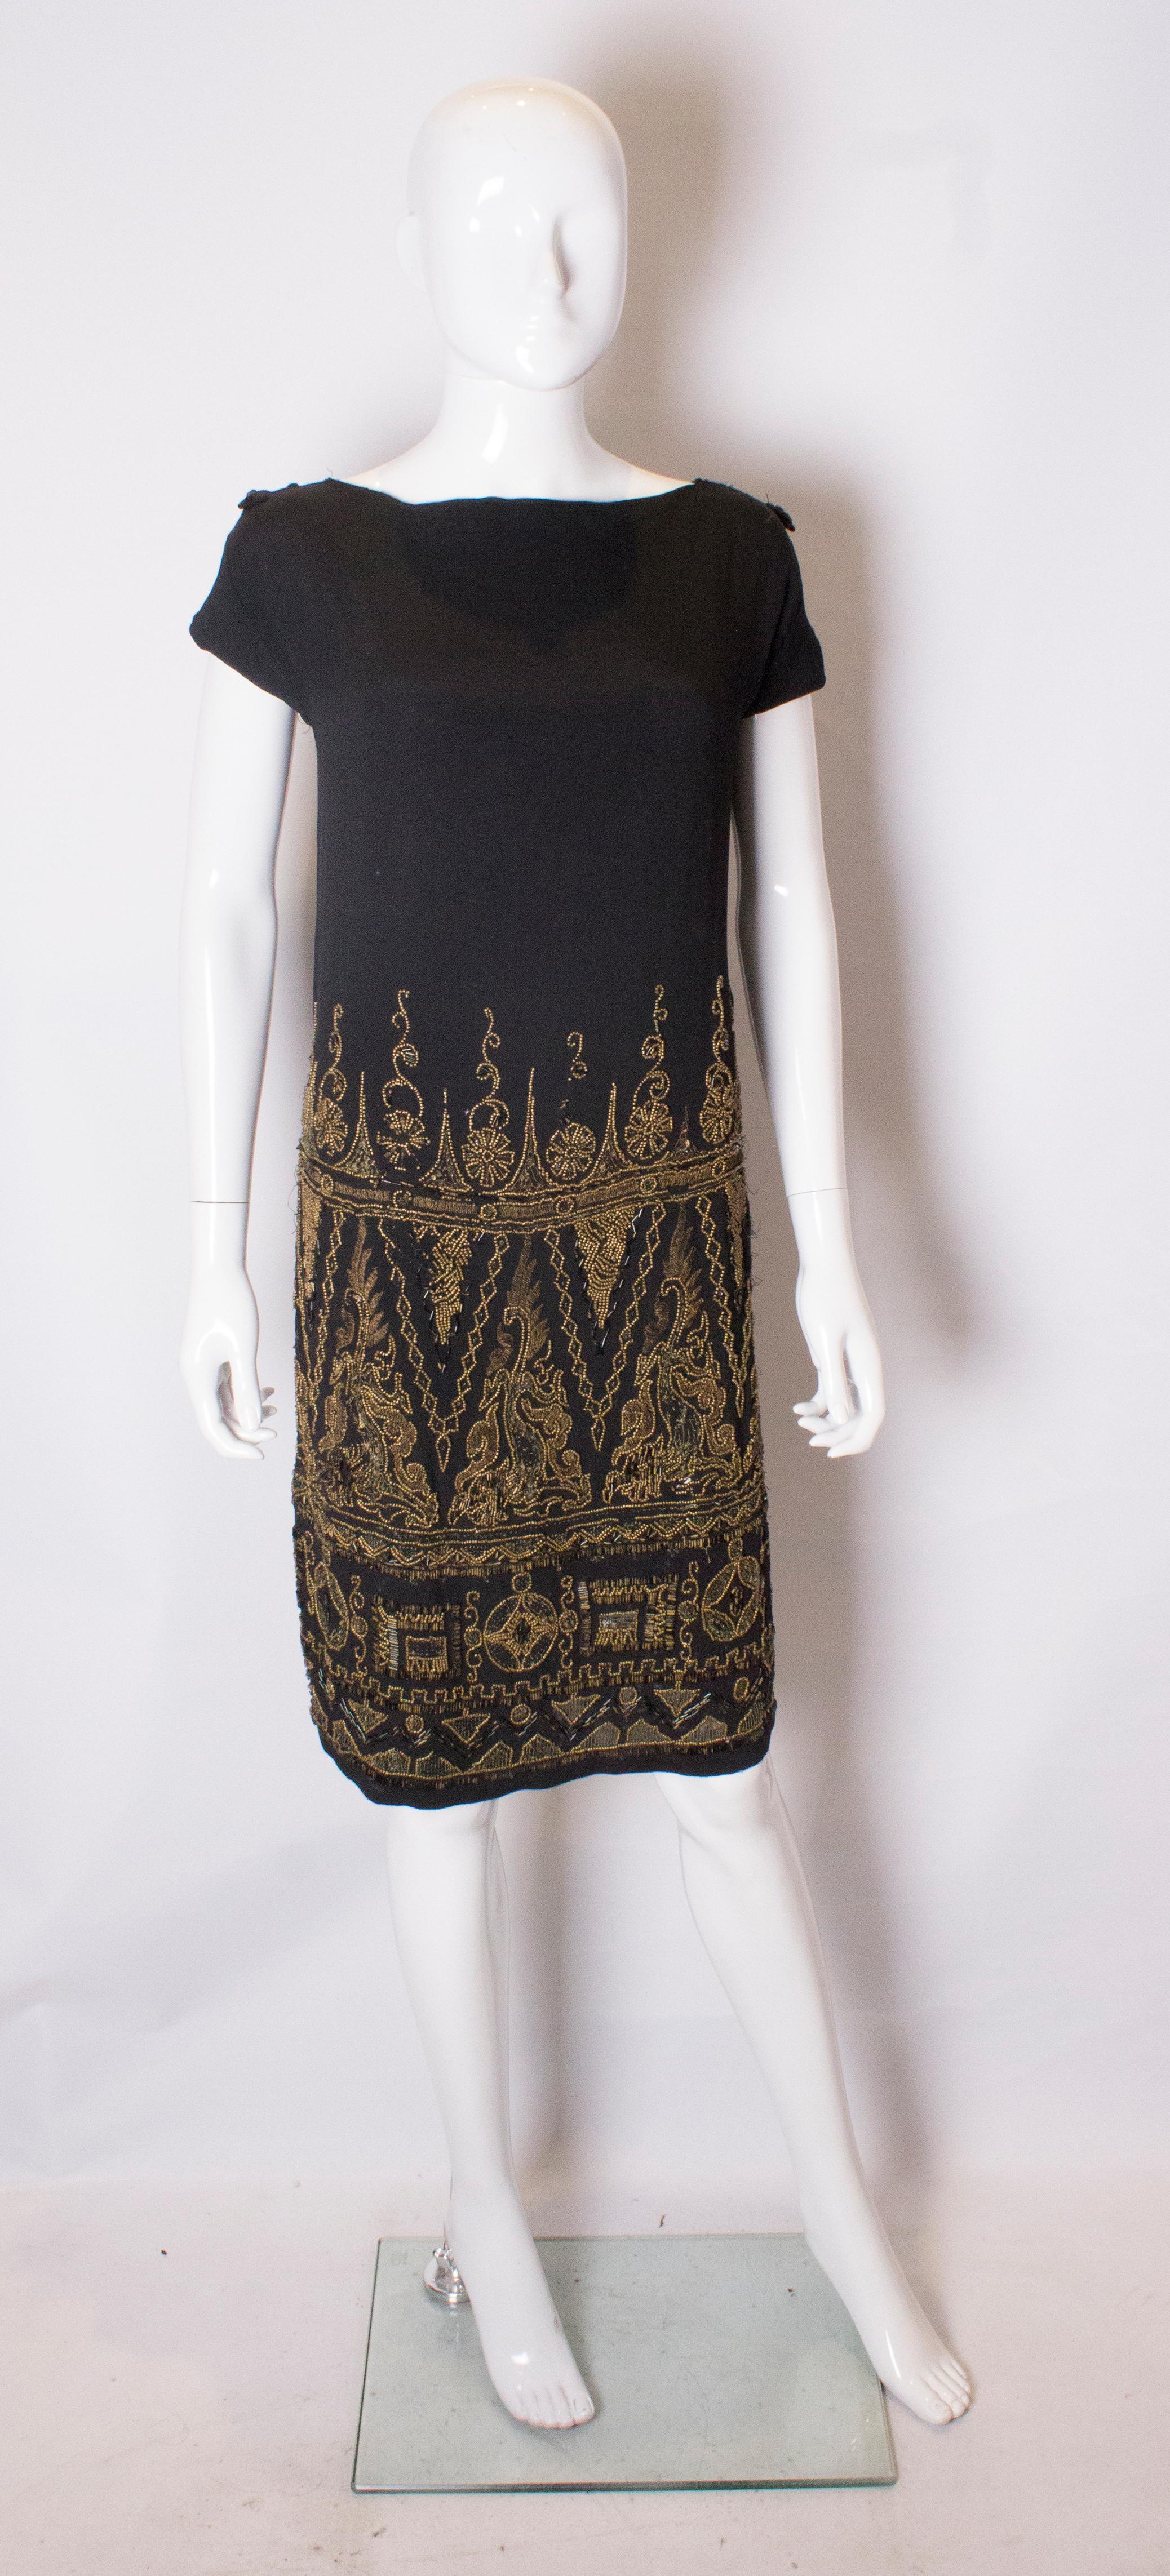 A lovely dress from the 1920s.. The dress is made of a black fabric with wonderful bead work in an attractive pattern. It has 20'' slits on either side and sadly some damage.